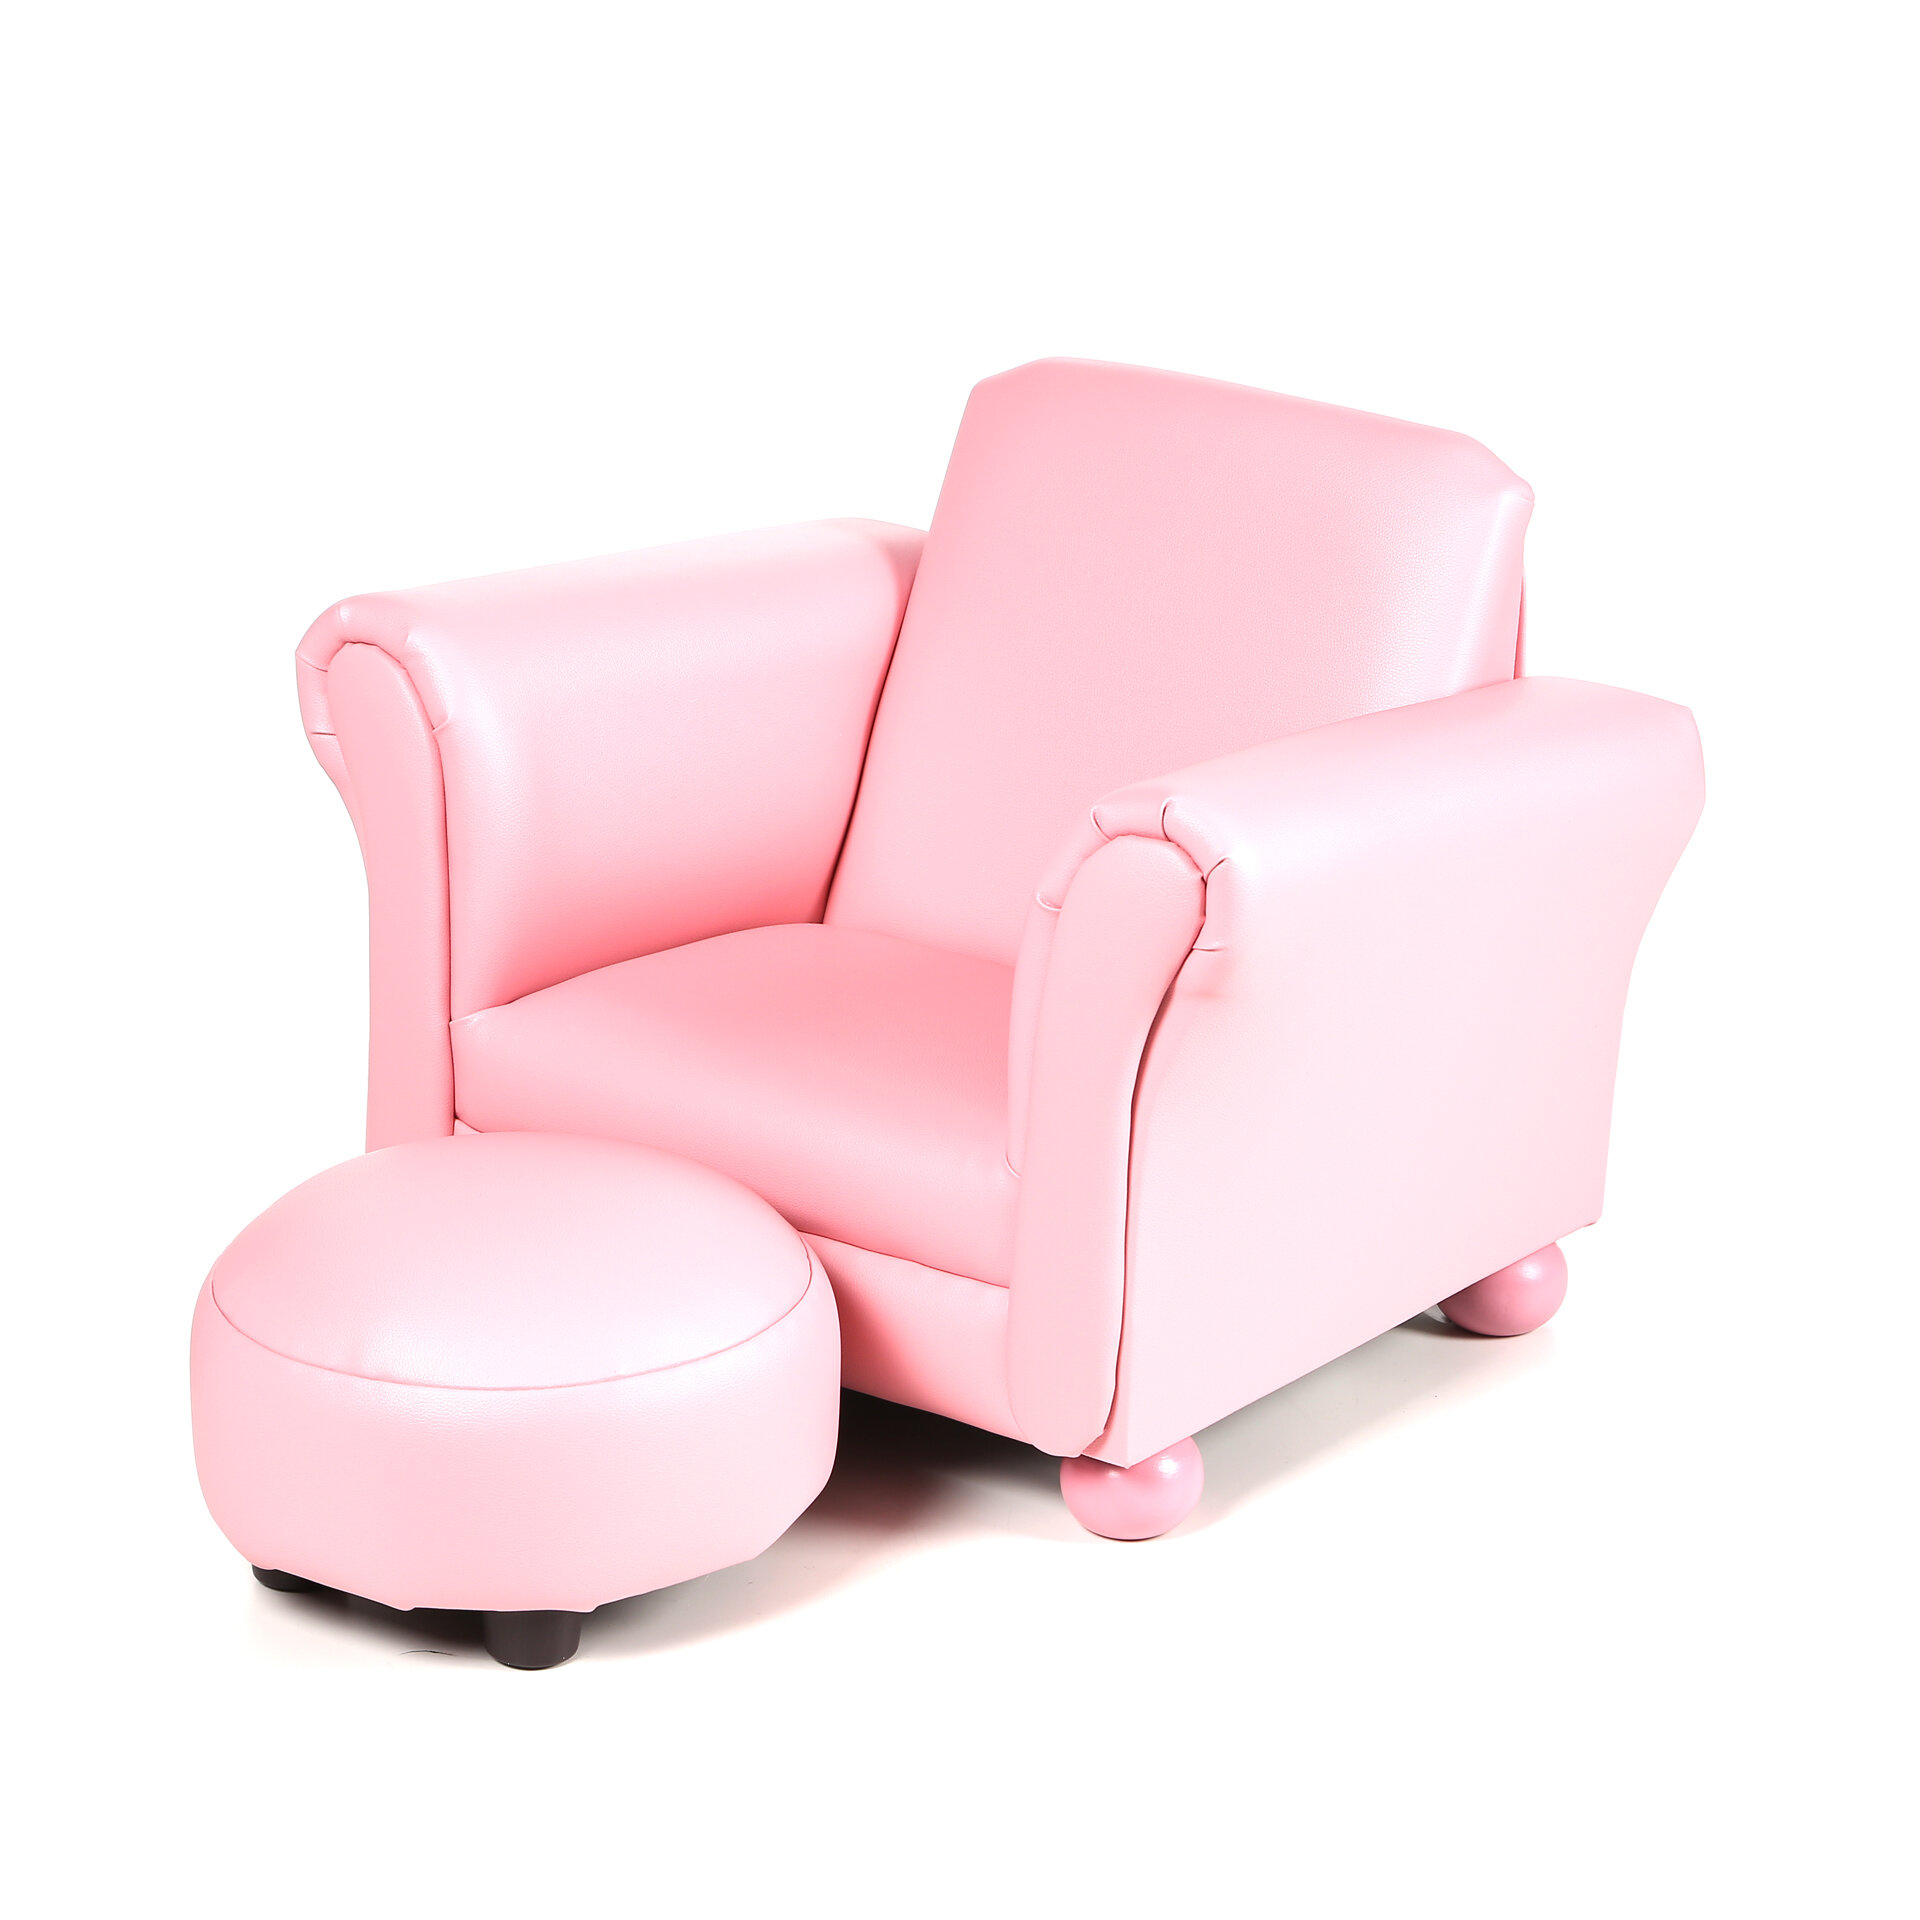 childrens leather chair